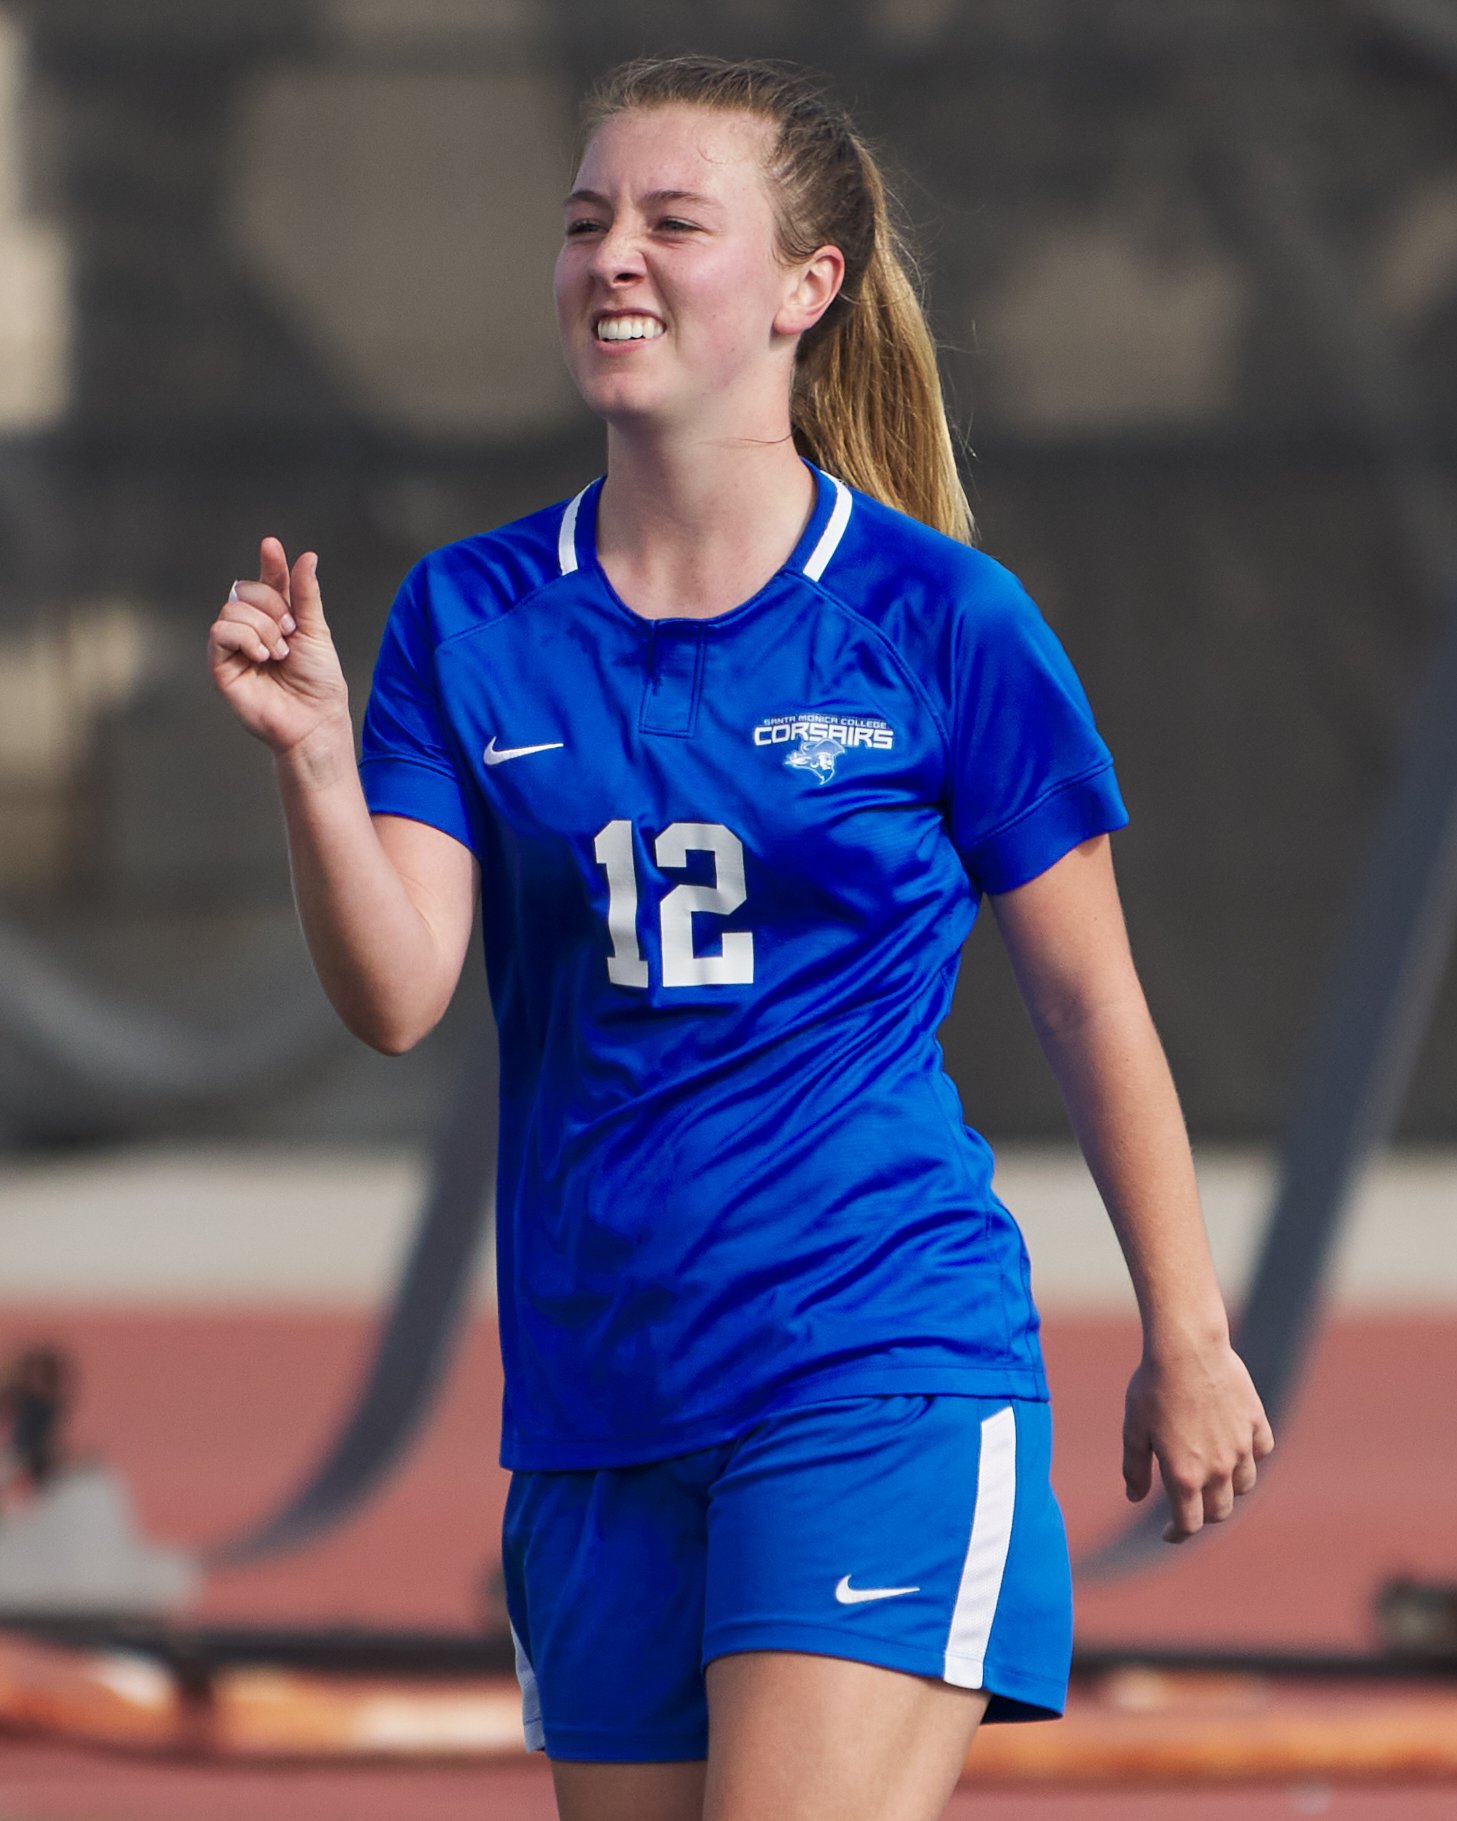  Santa Monica College Corsairs' Eden Hotch shows by how much her shot missed the goal during the women's soccer match against the Glendale Community College Vaqueros on Friday, Oct. 21, 2022, at Corsair Field in Santa Monica, Calif. The Corsairs won 